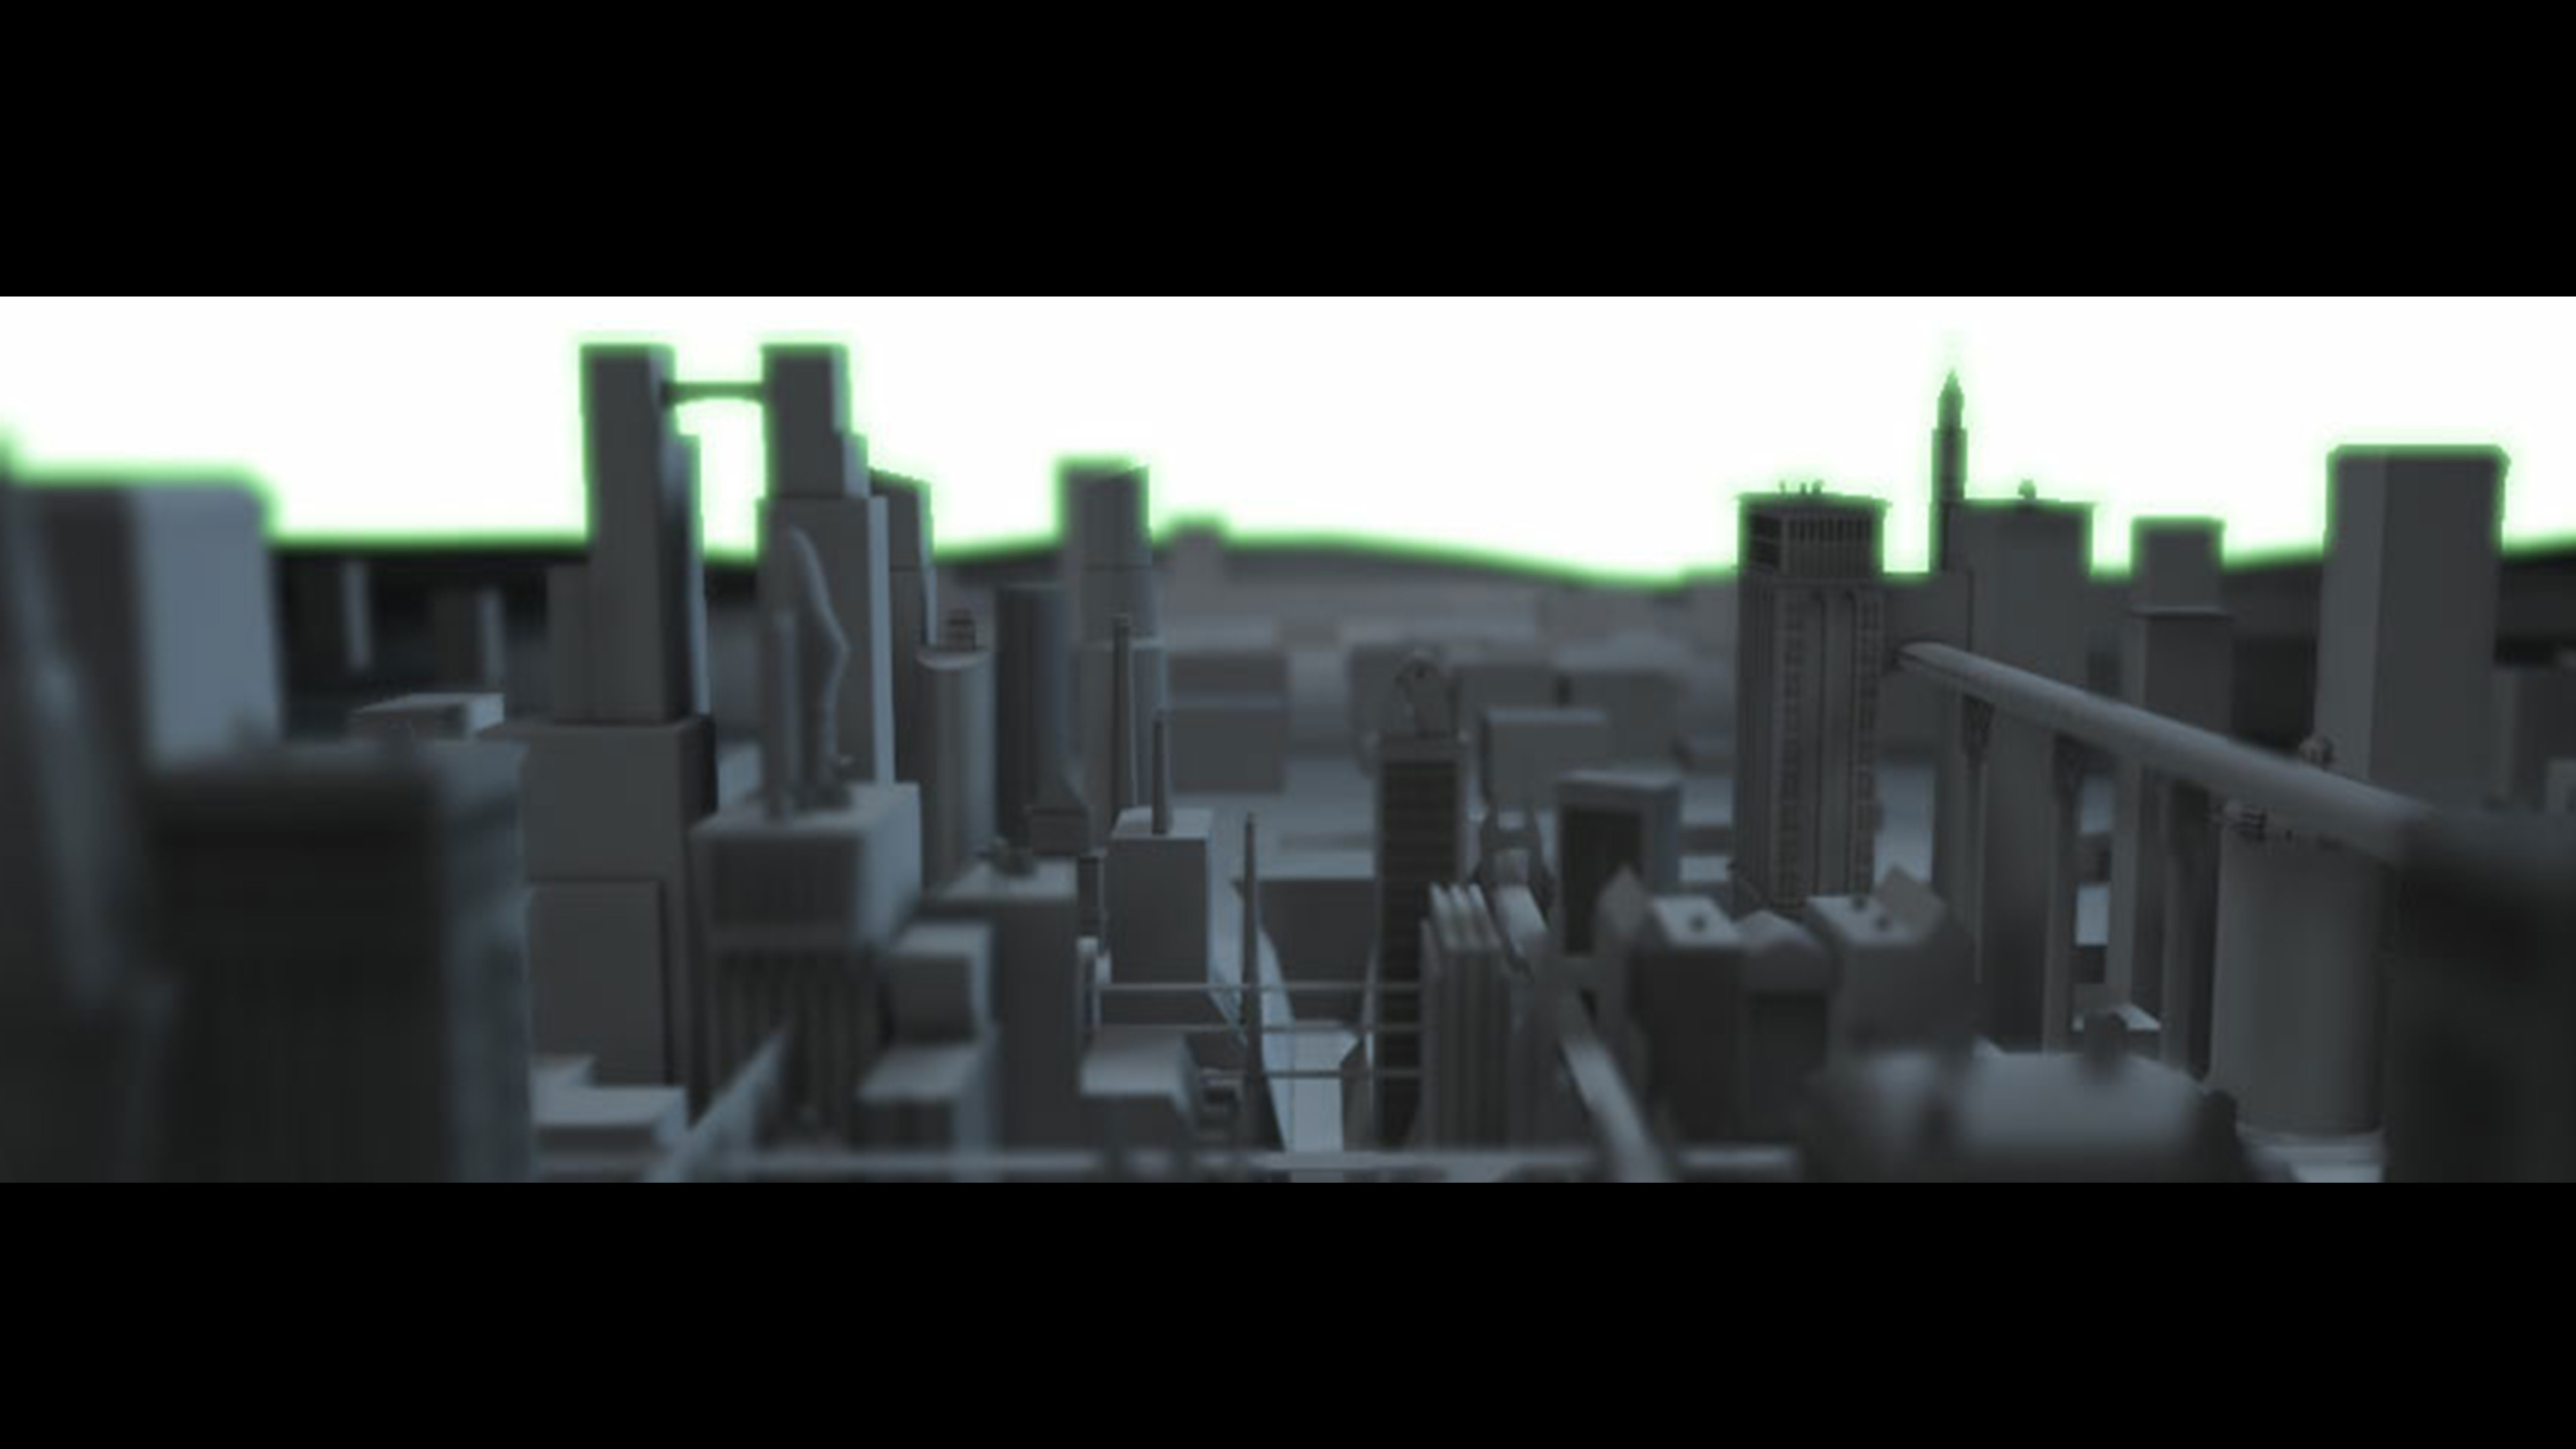 City model rendered to look like micro photo. Created 2002